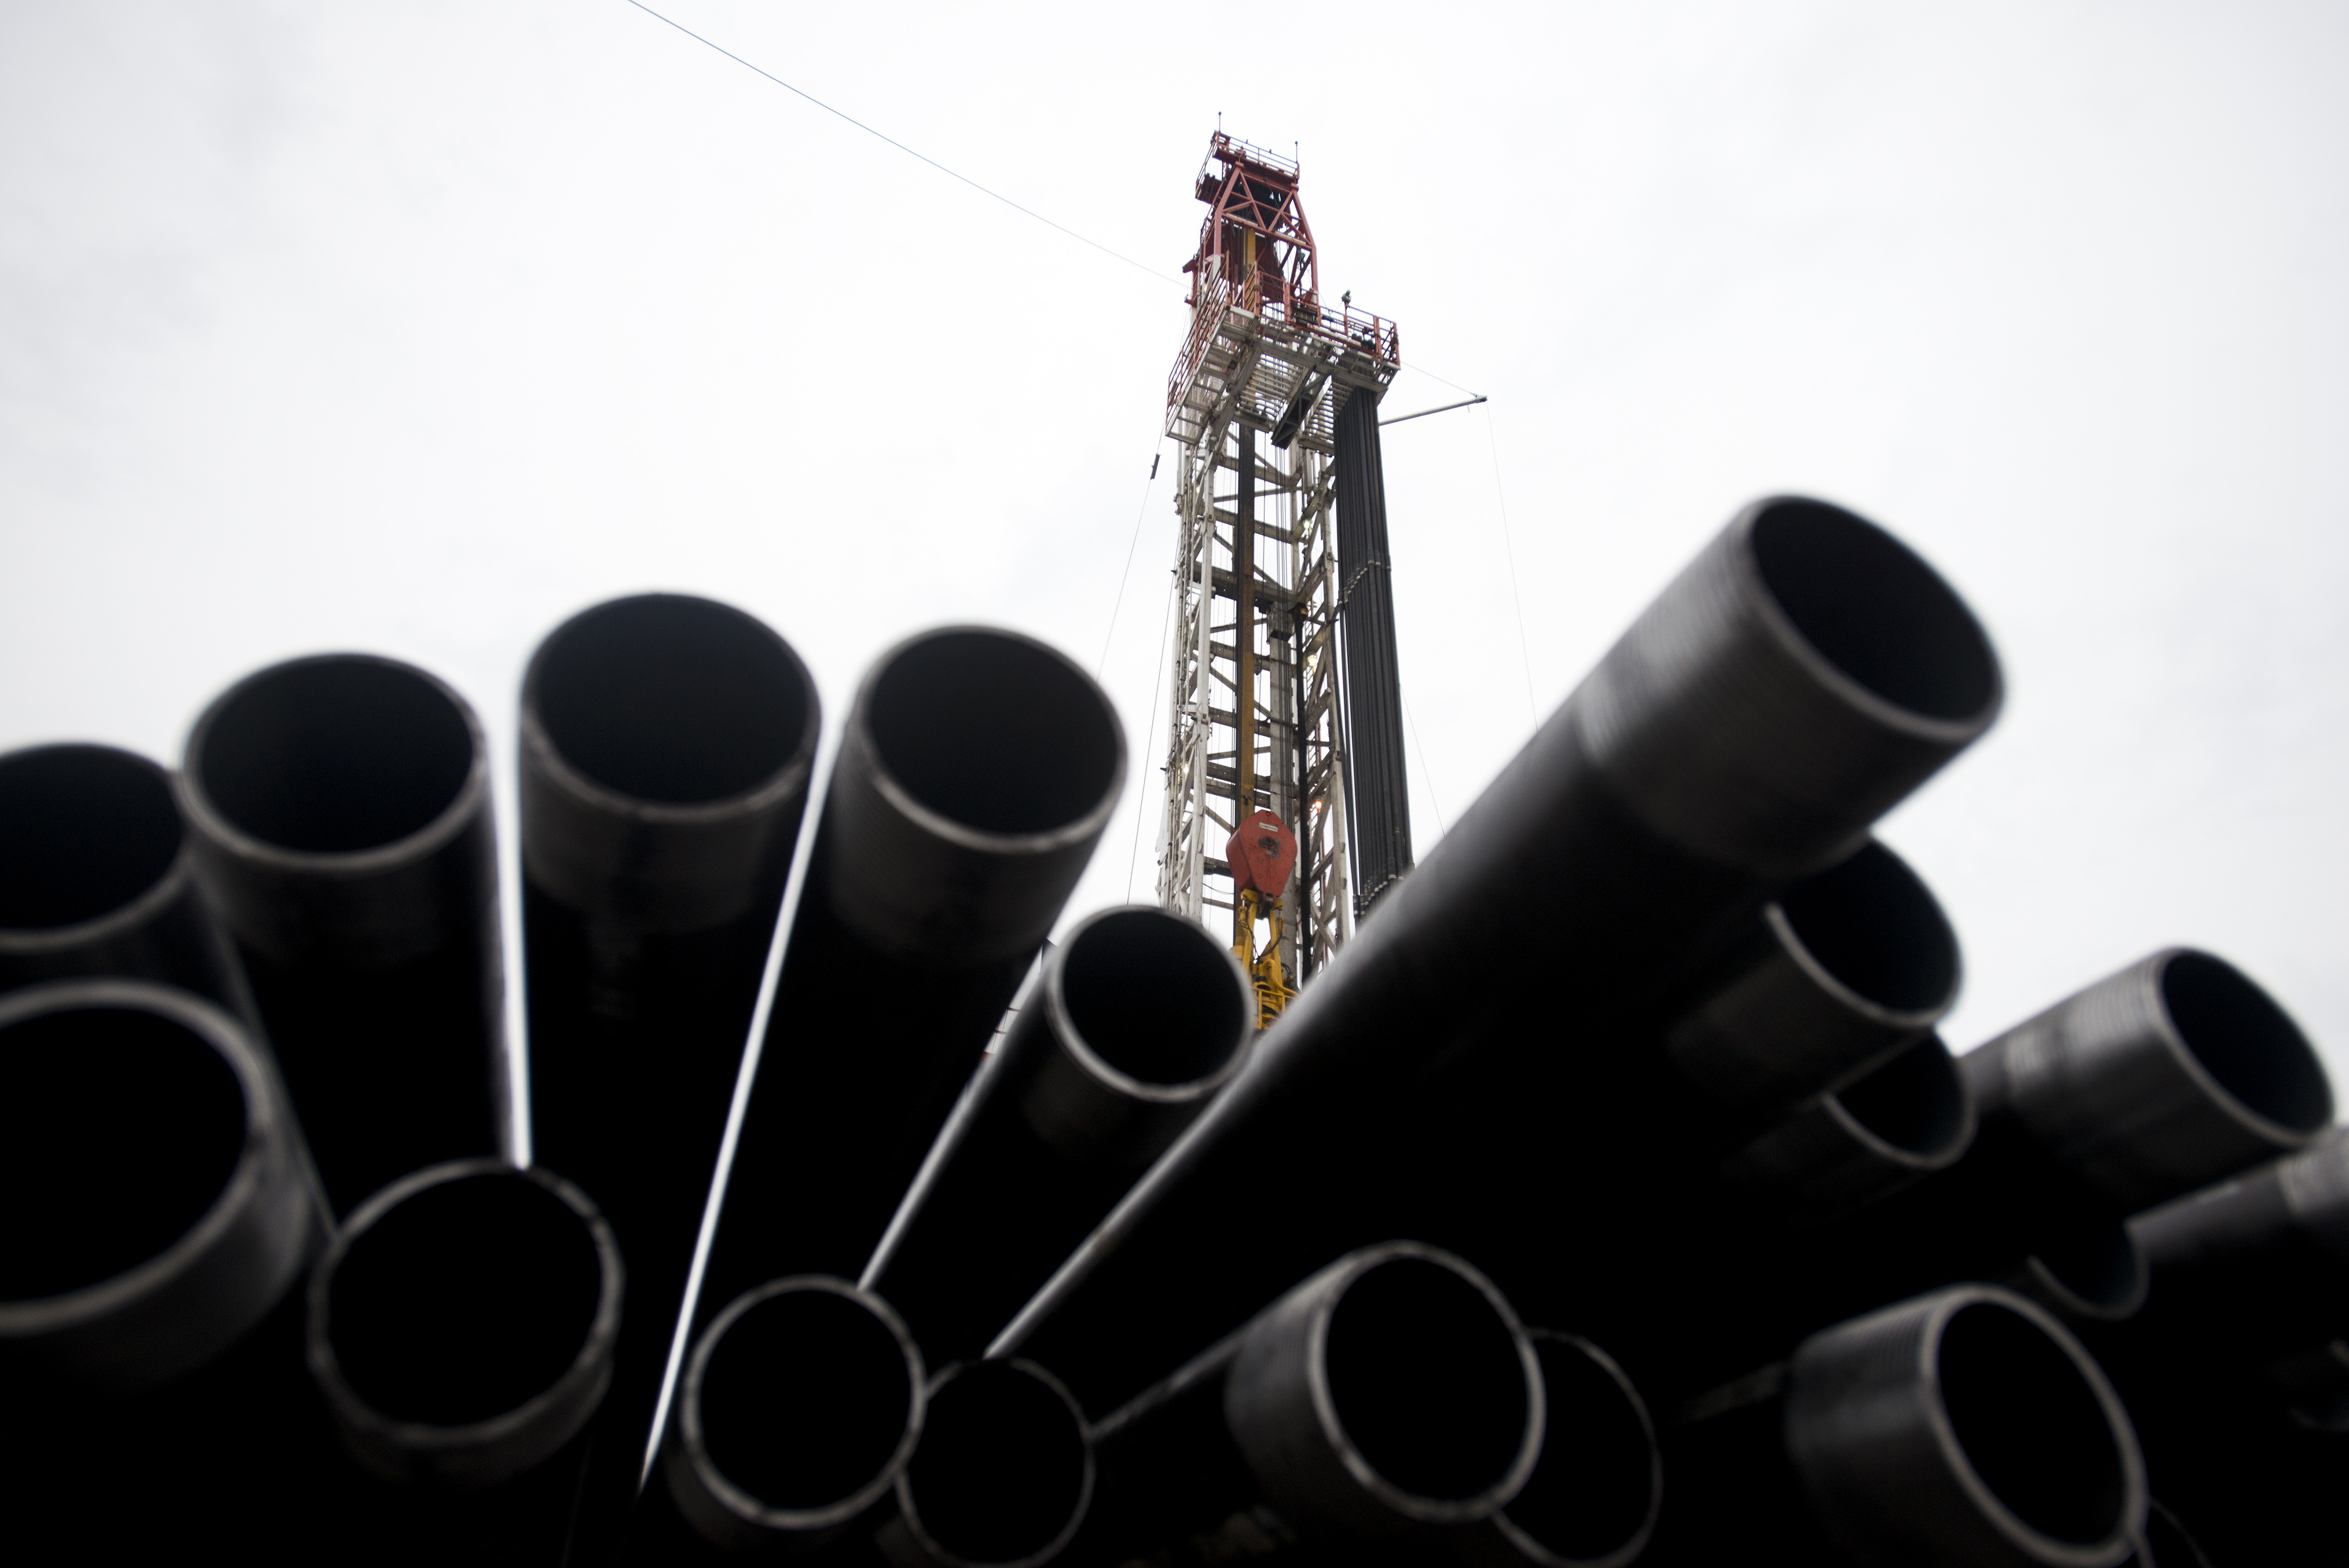 Threaded drilling pipes are stacked at a hydraulic fracturing site owned by EQT Corp. located atop the Marcellus shale rock formation in Washington Township, Penn., U.S., on Oct. 31, 2013. (Ty Wright—Bloomberg/Getty Images)